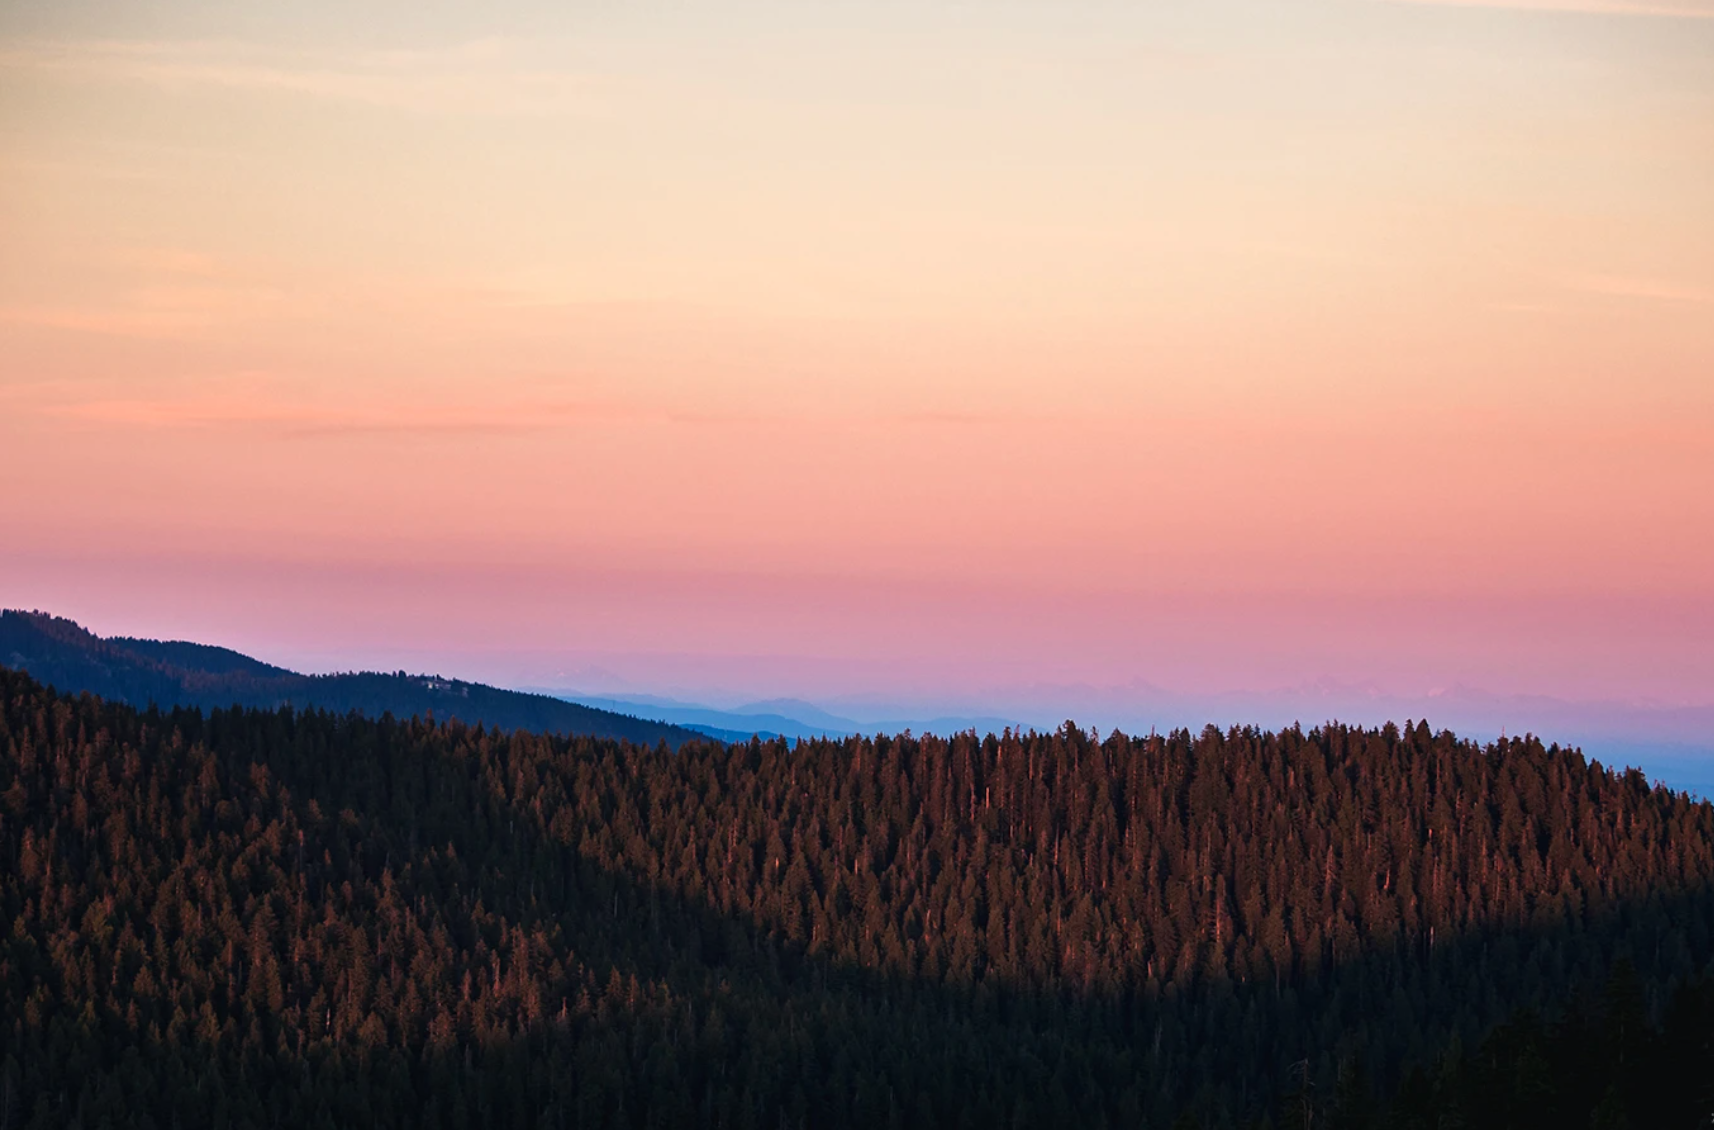 sunsetting behind a vast forrest